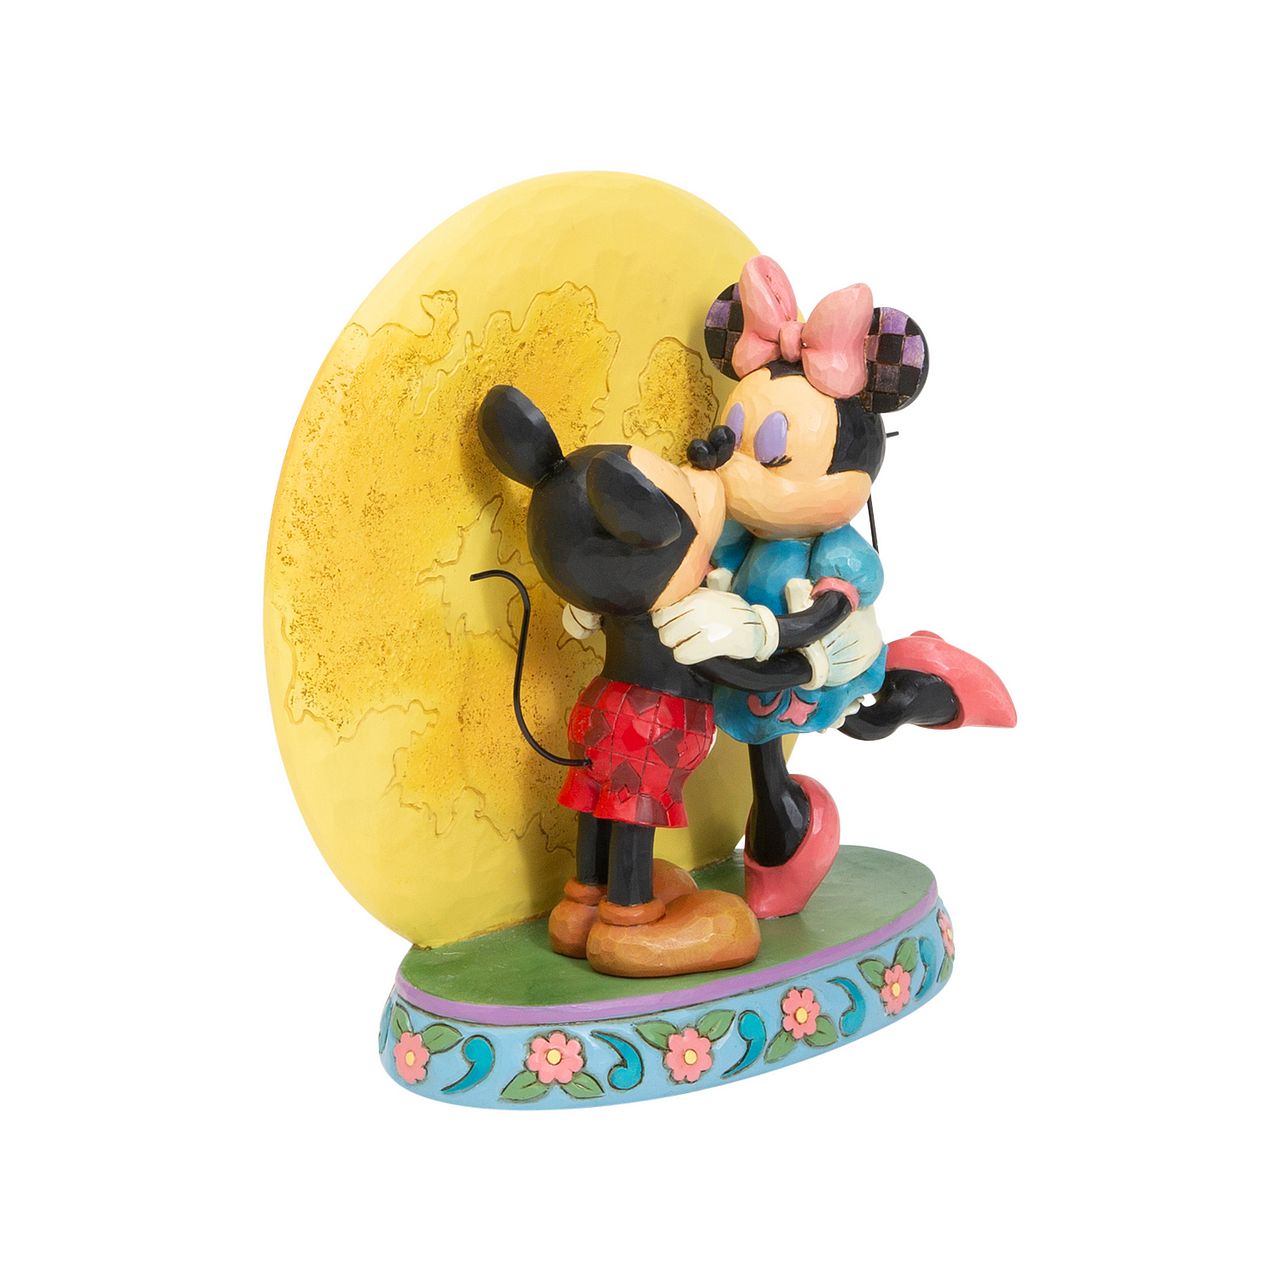 Jim Shore Magic and Moonlight Mickey and Minnie with Moon Figurine  This delightful figurine portrays Mickey & his sweetheart Minnie dancing in the moonlight. This refreshing piece celebrates springtime romance and is sure to be a hit with collectors.